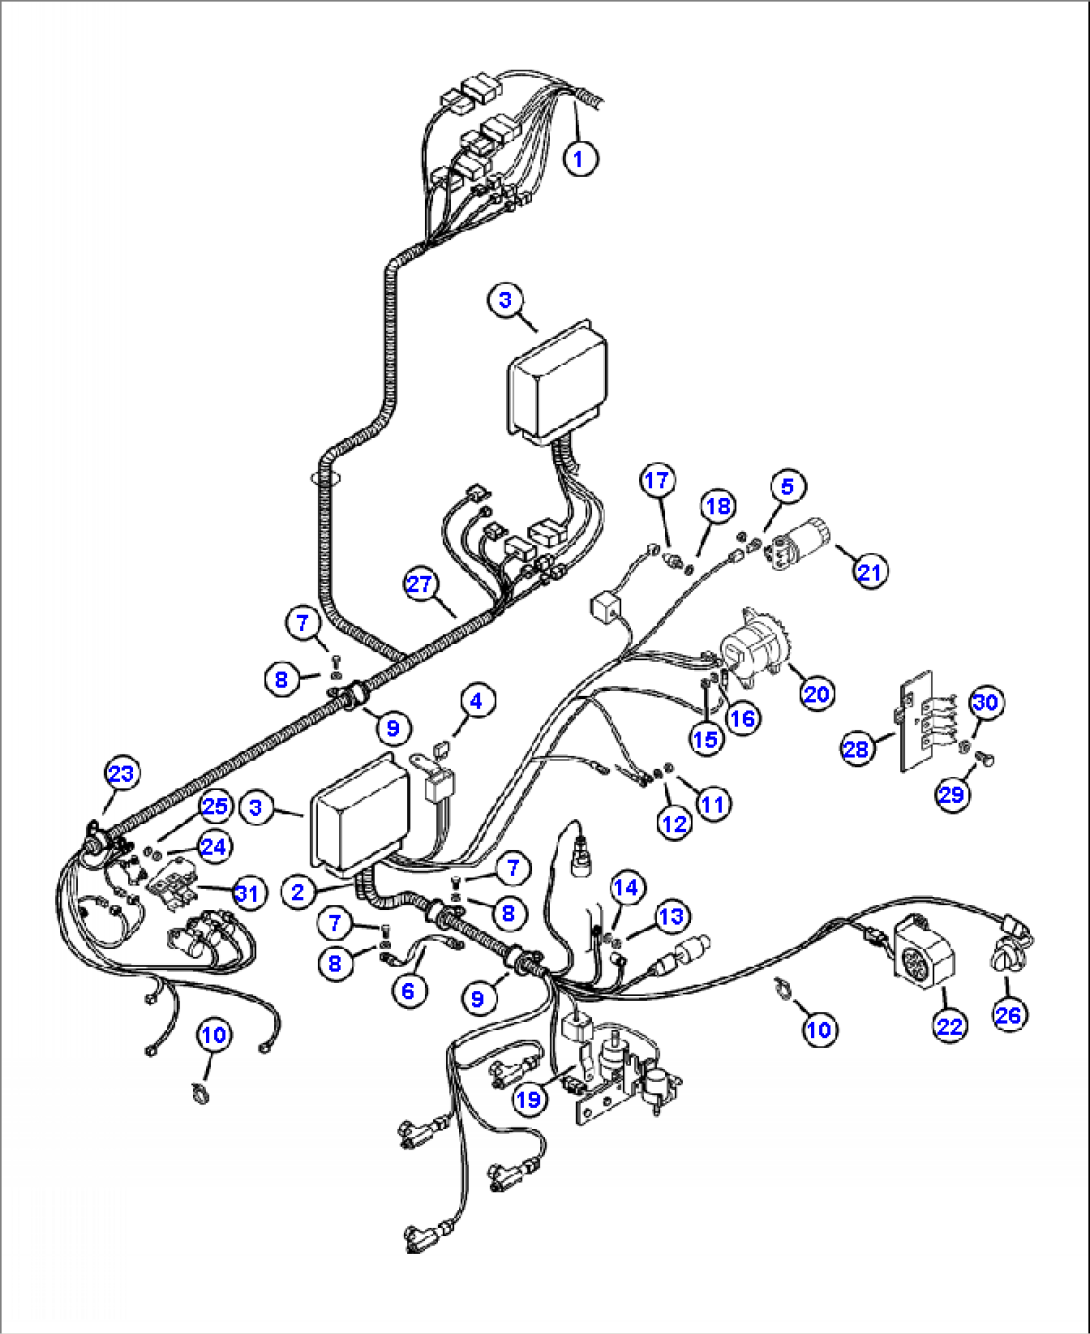 E2510-01A01 ELECTRICAL SYSTEM FRAME WIRING